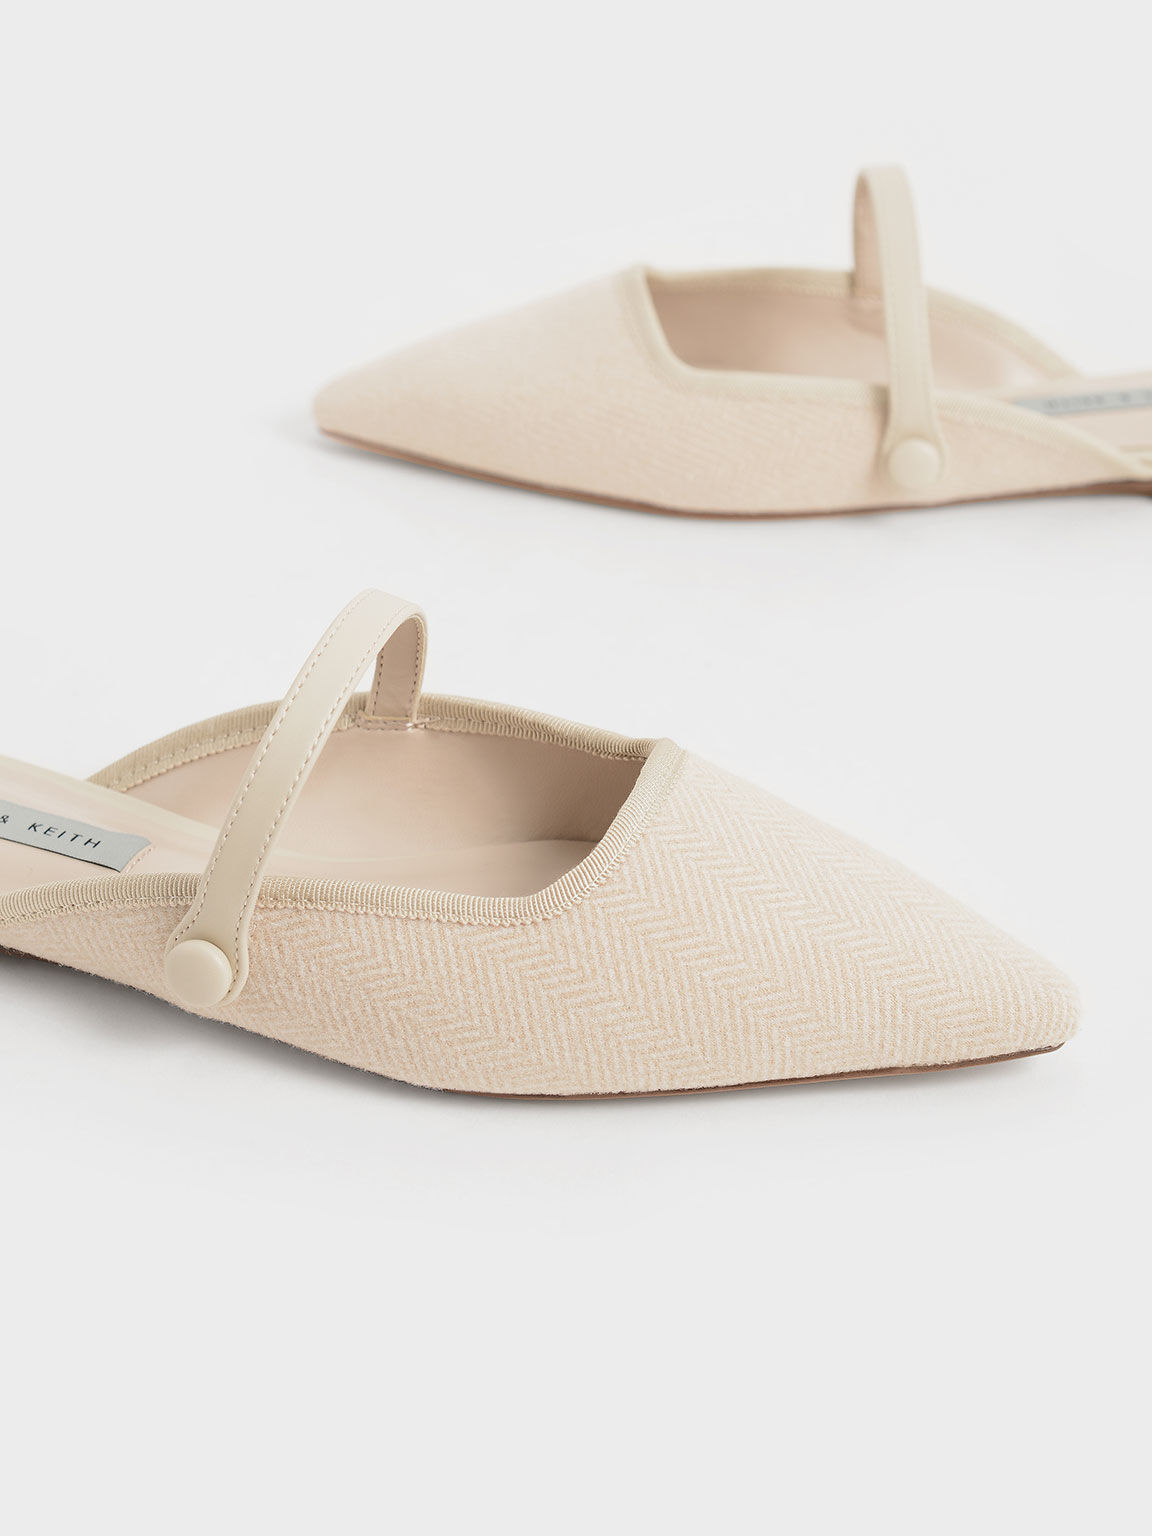 Woven Fabric Mary Jane Mules, Beige, hi-res